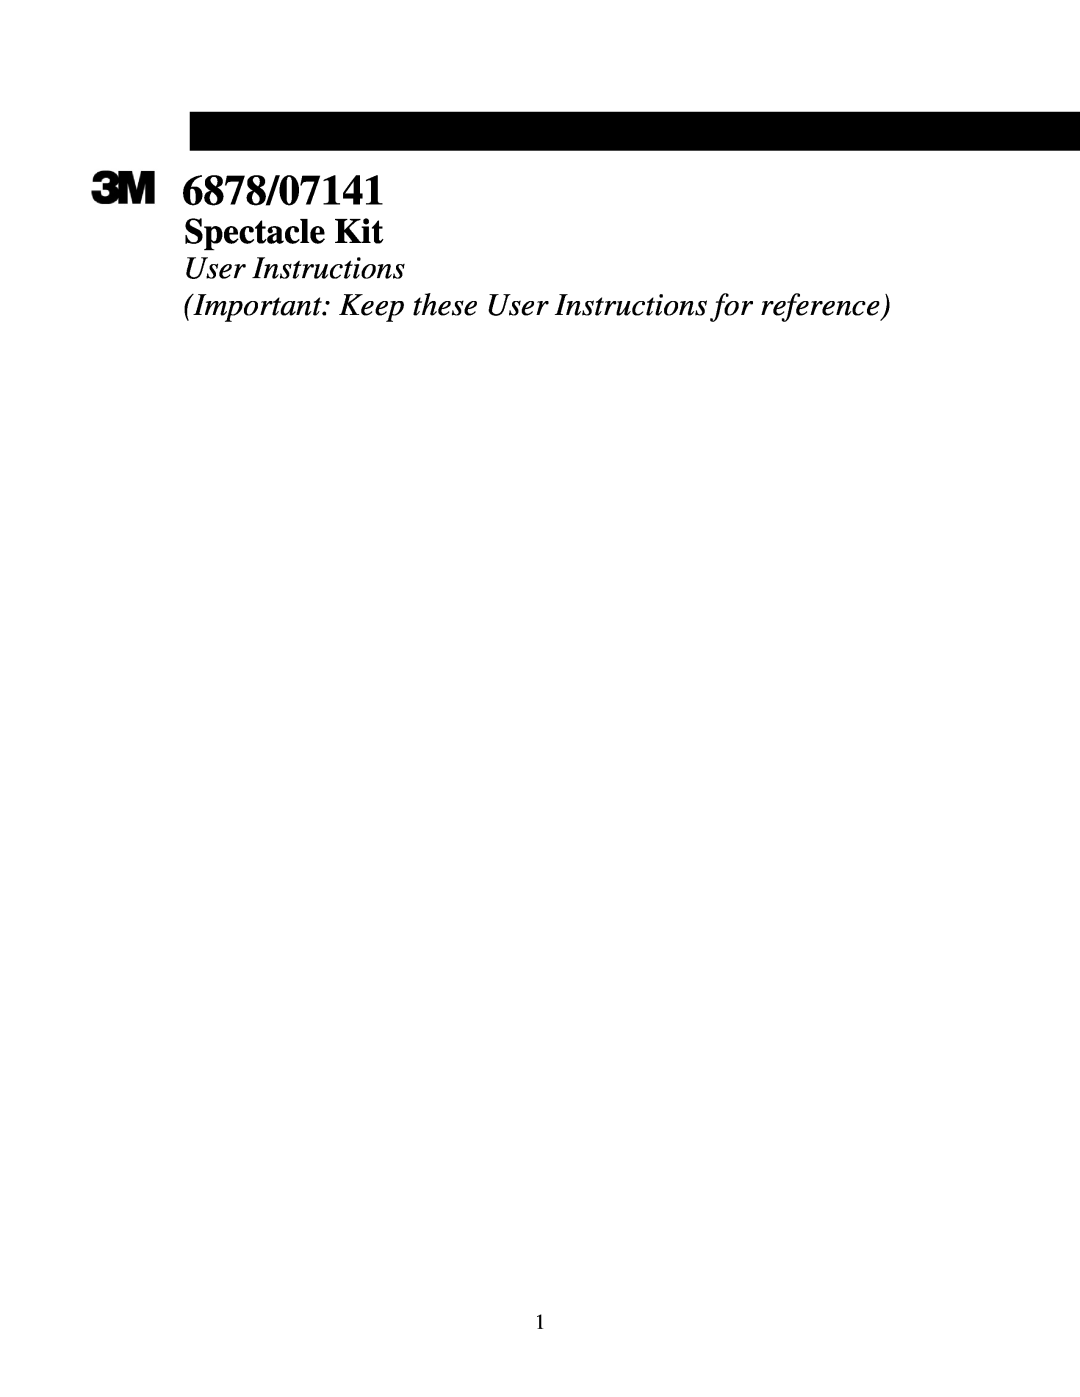 3M manual 6878/07141, Spectacle Kit, Important Keep these User Instructions for reference 